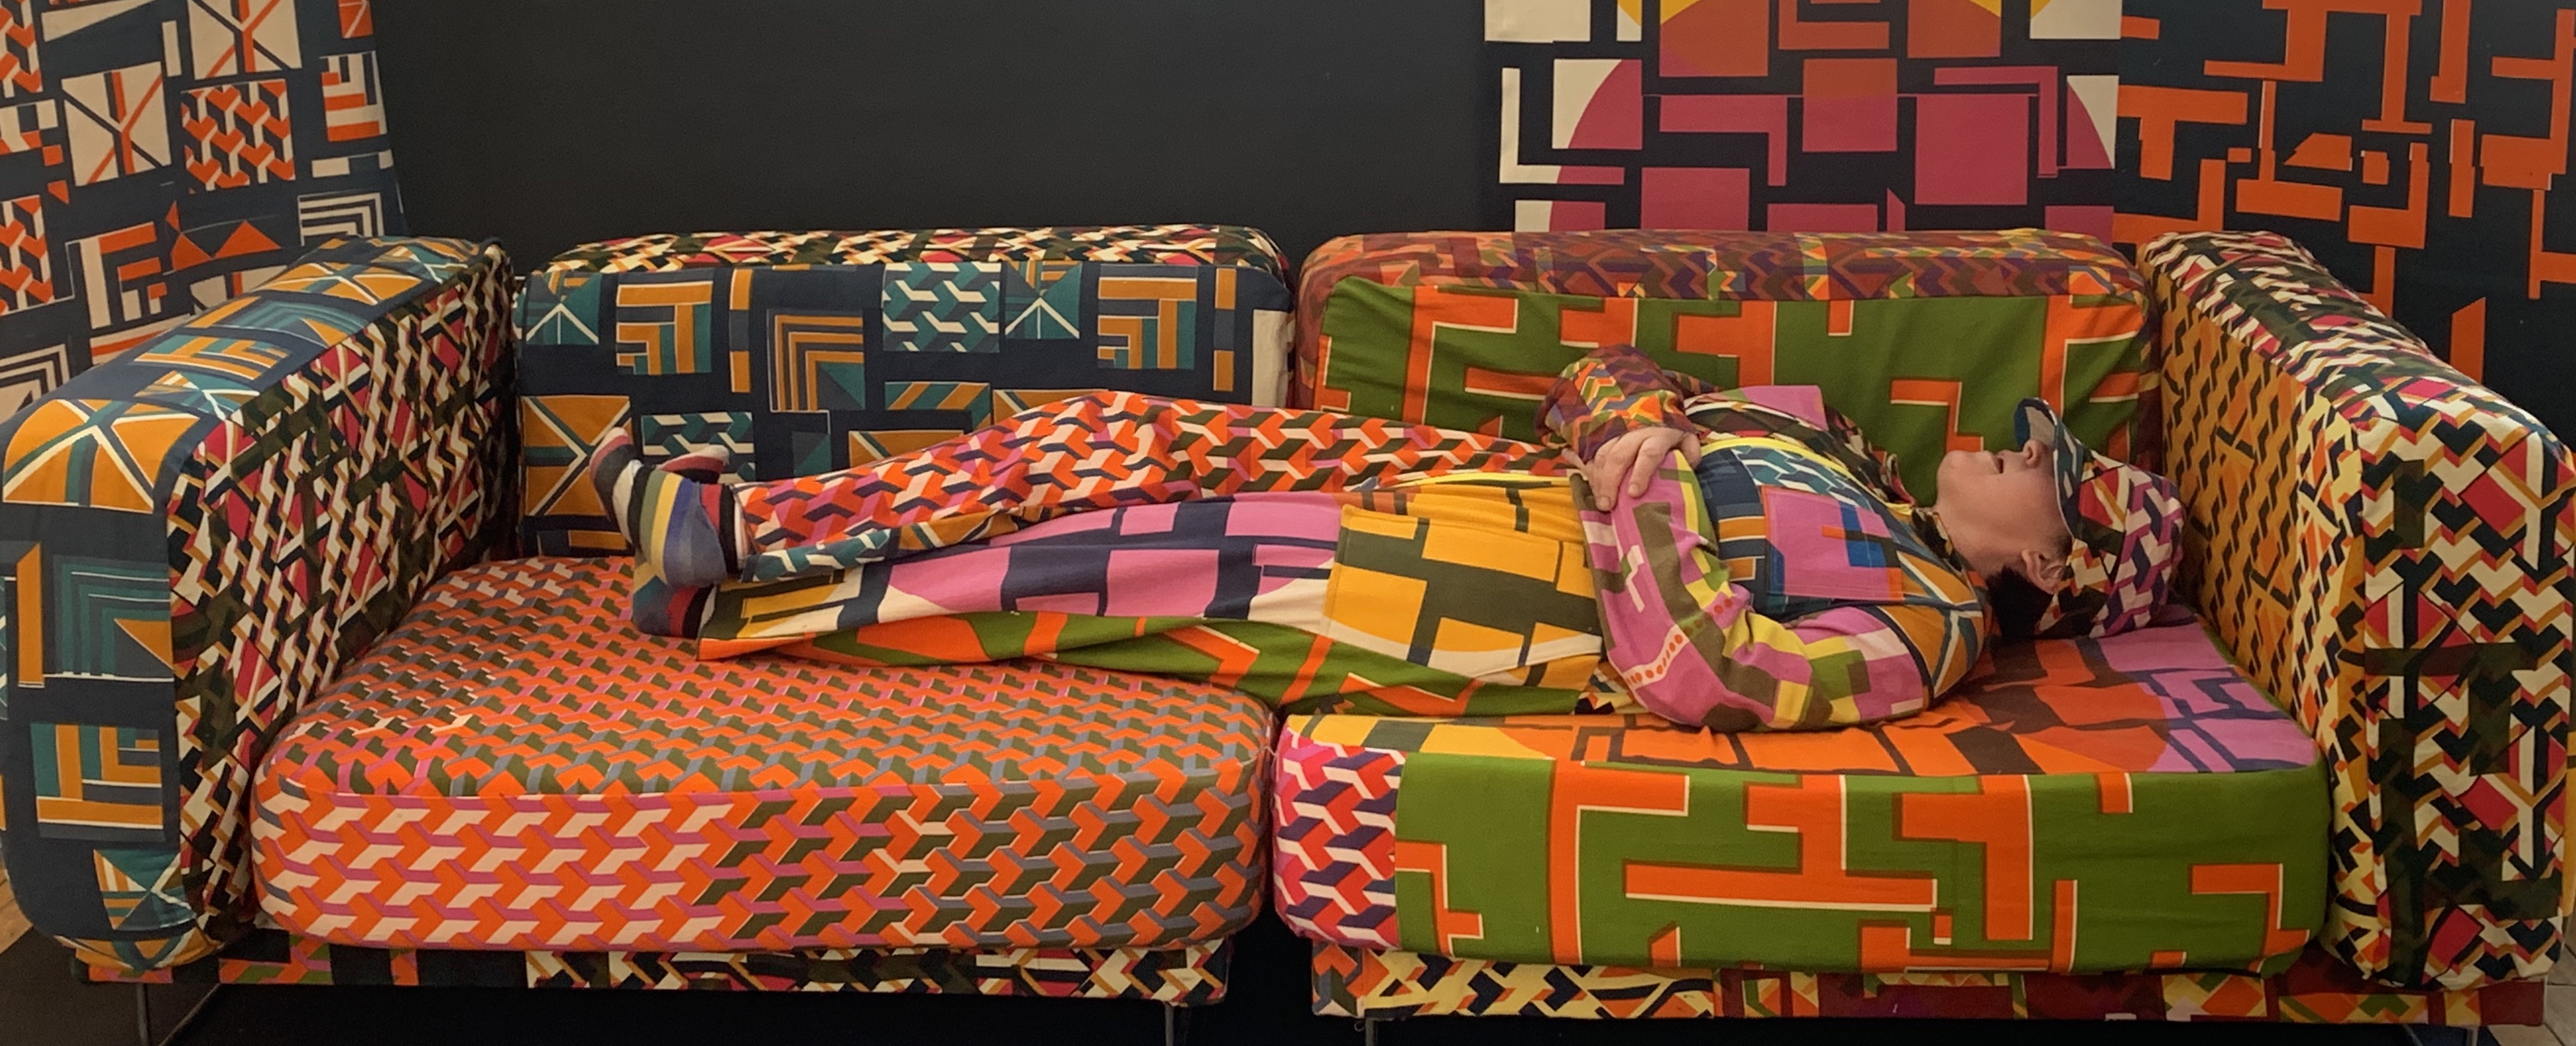 Model in boilersuit lies on sofa. The colourful array of screen-printed patterns are designed to work together on the sofa and boilersuit to camouflage the model.